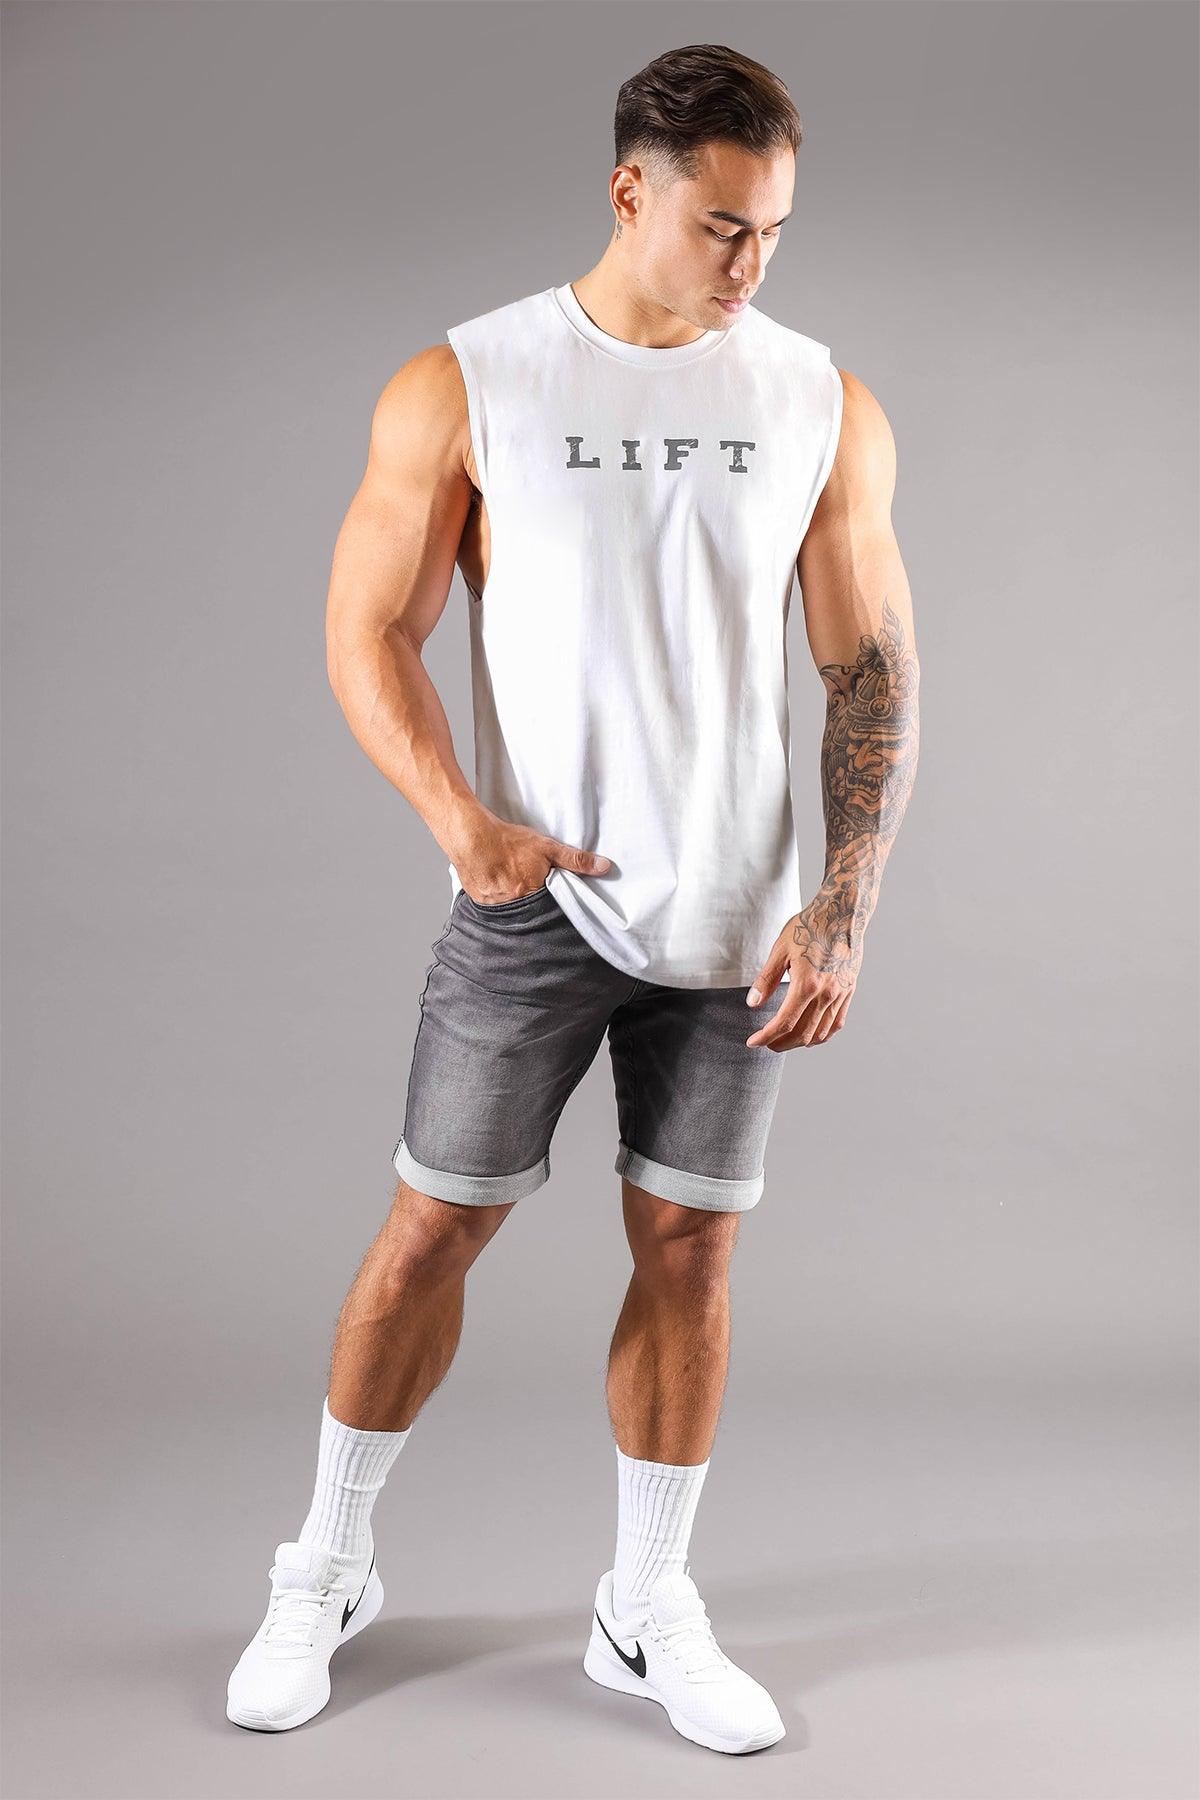 Workout Muscle Tee - Lift - Jed North Canada